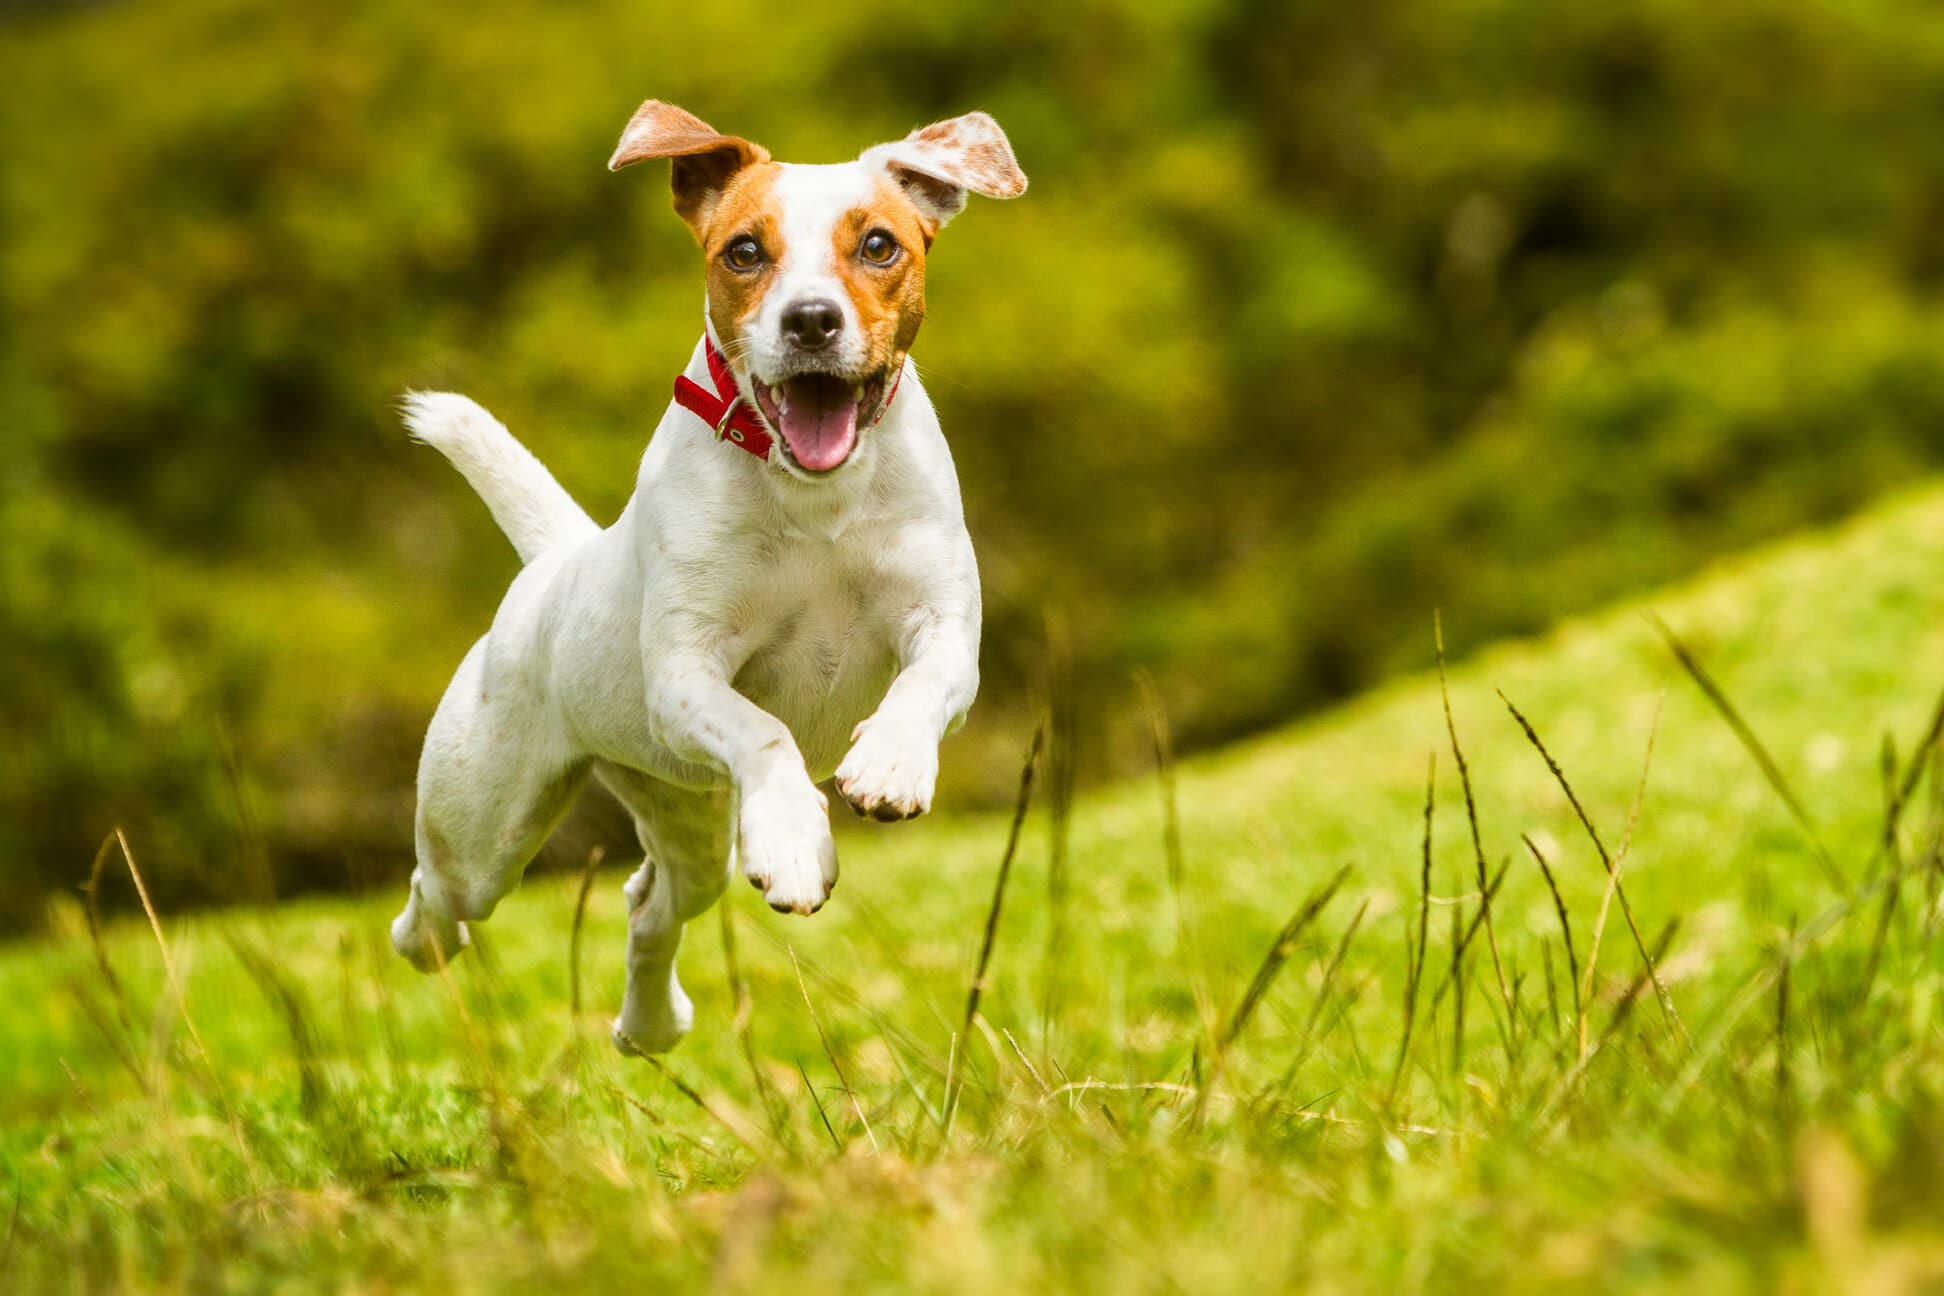 Jack Russell Parson Terrier jumping up in the air